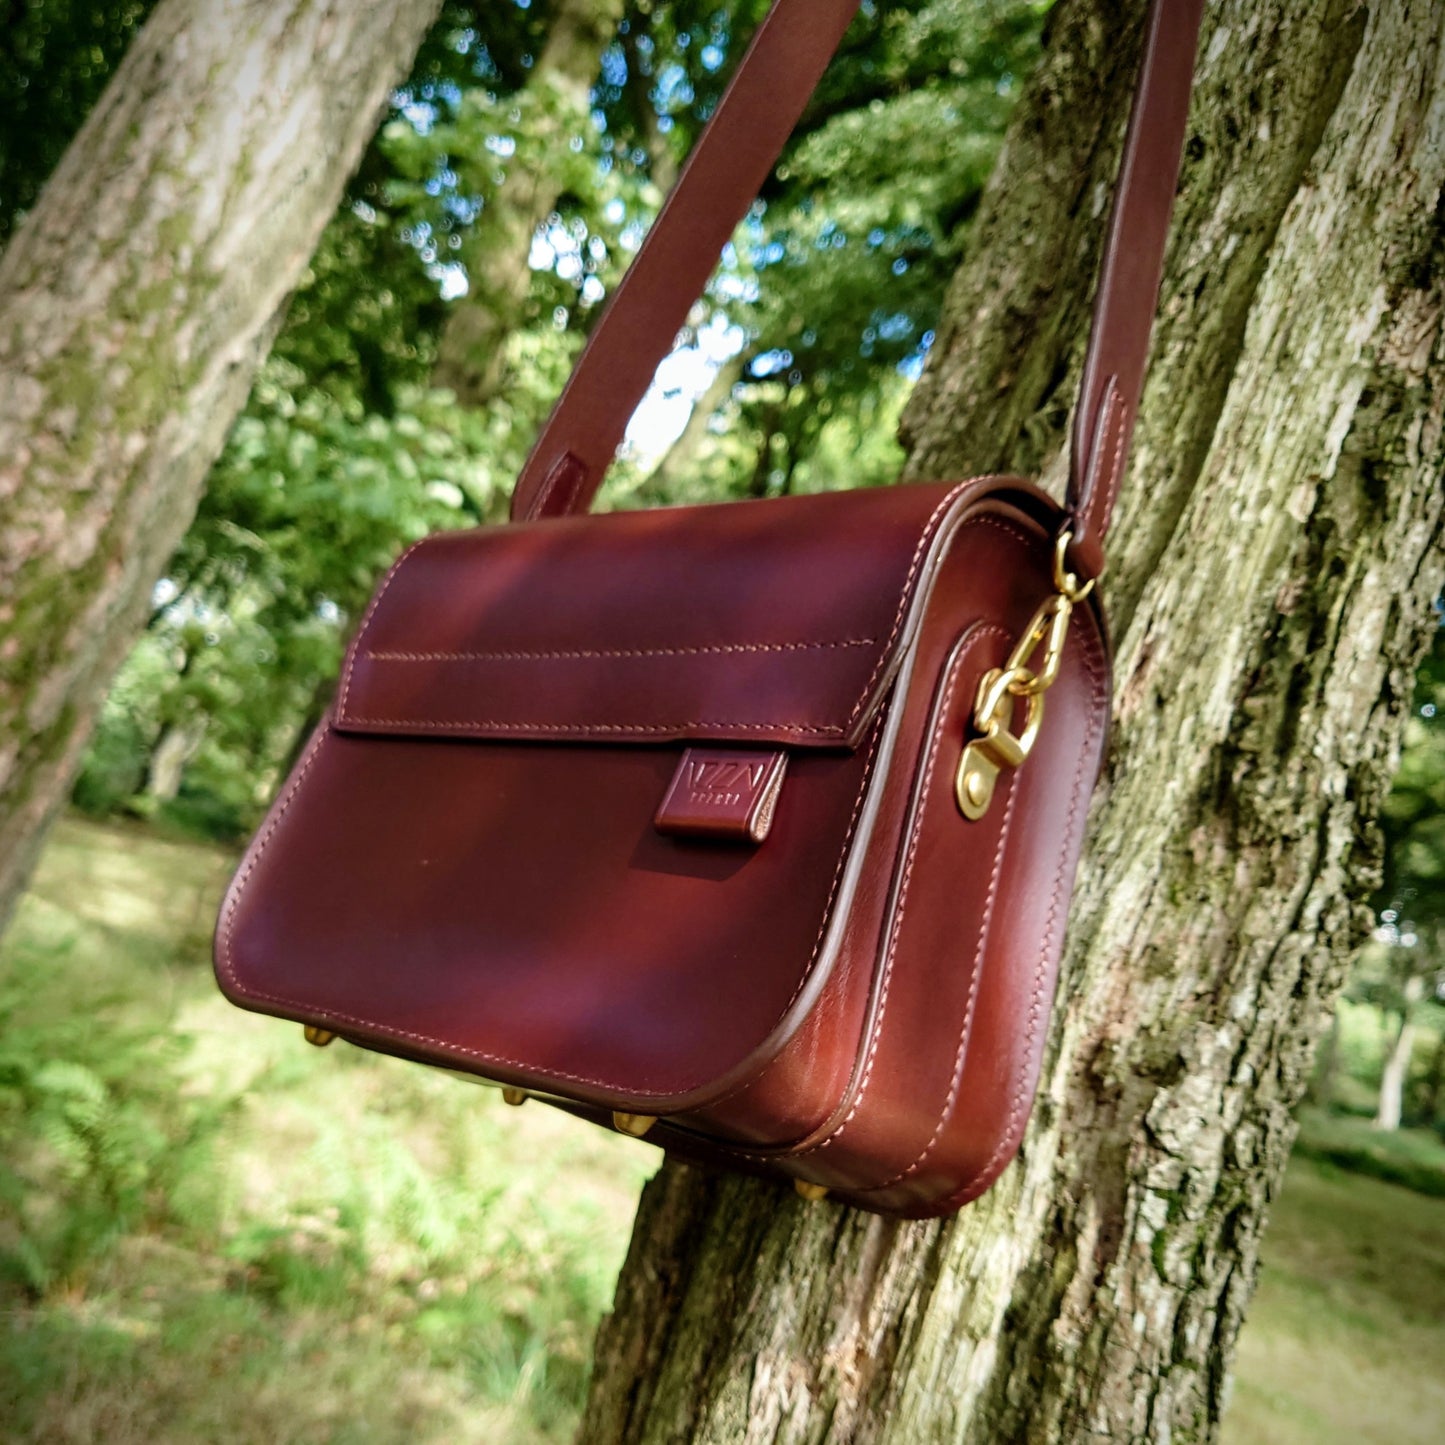 The Classic British Collection Cartridge Bag